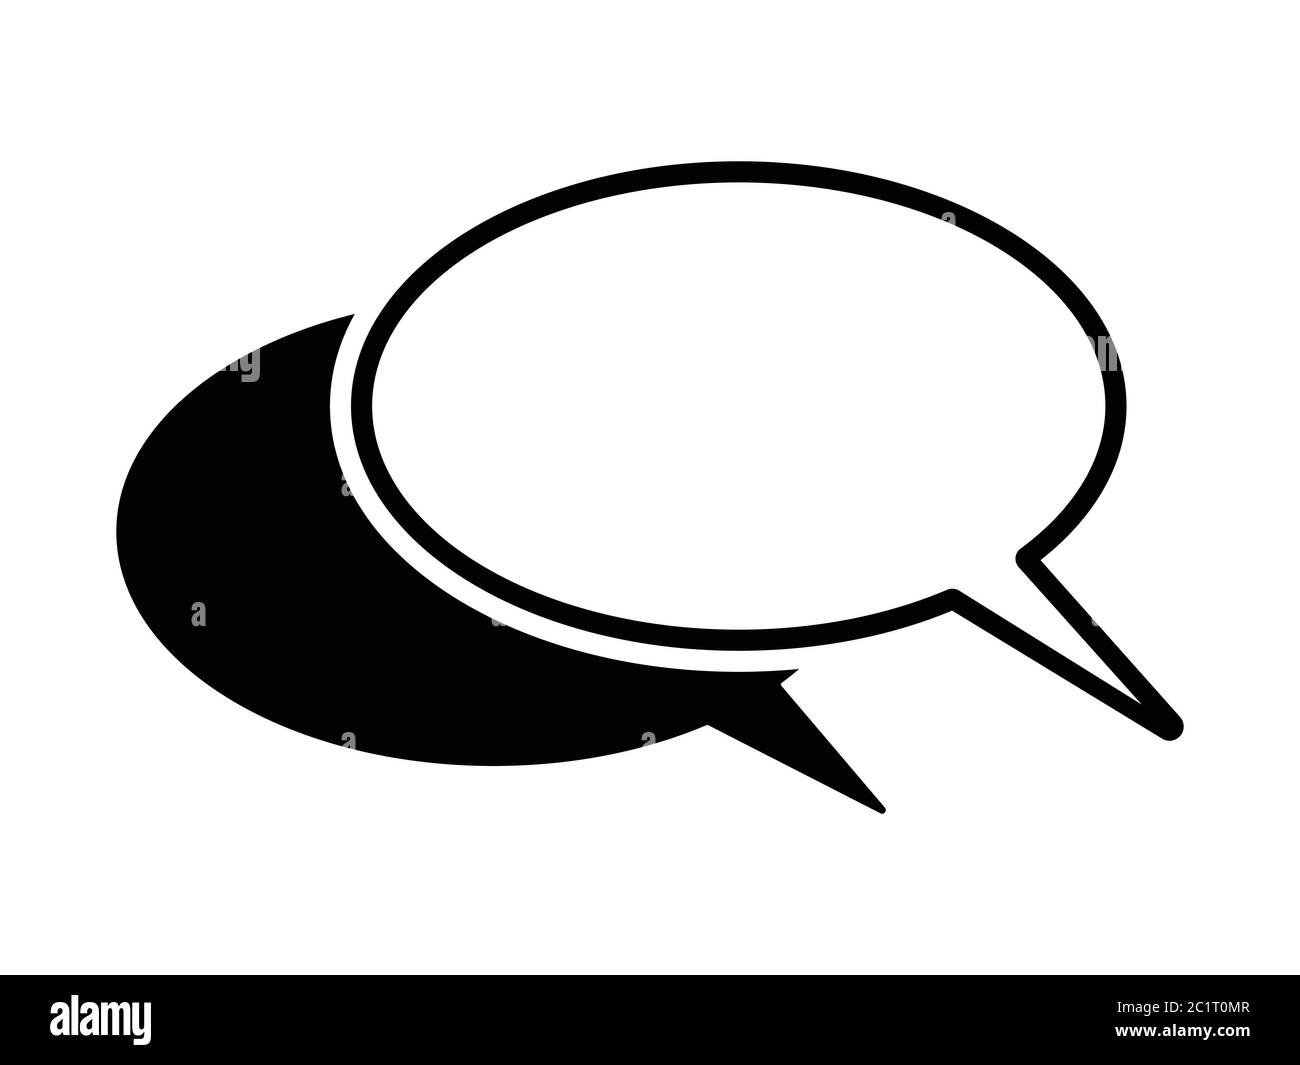 Two Blank Speech Bubbles Icon. Black Illustration Isolated on a White Background. EPS Vector Stock Vector